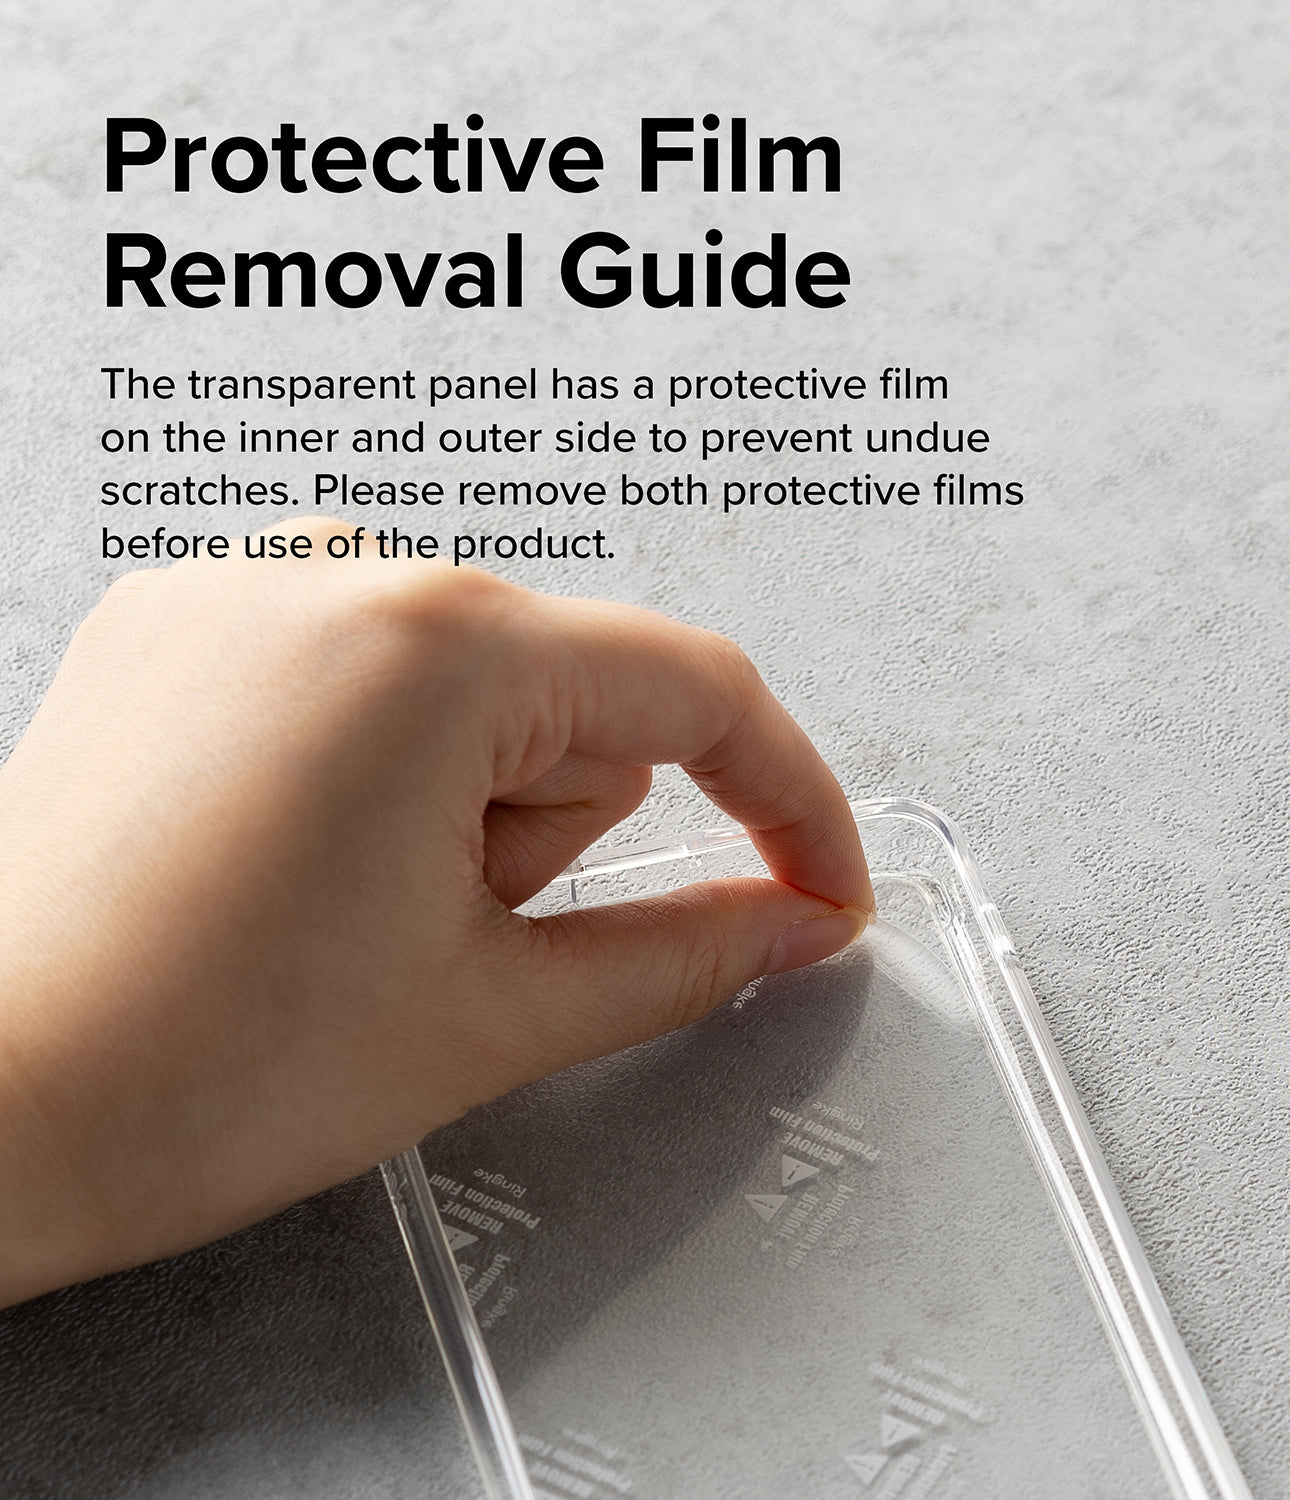 Protective Film Removal Guide l The transparent panel has a protective film on the inner and outer side to prevent undue scratches. Please remove both protective films before use of the product.